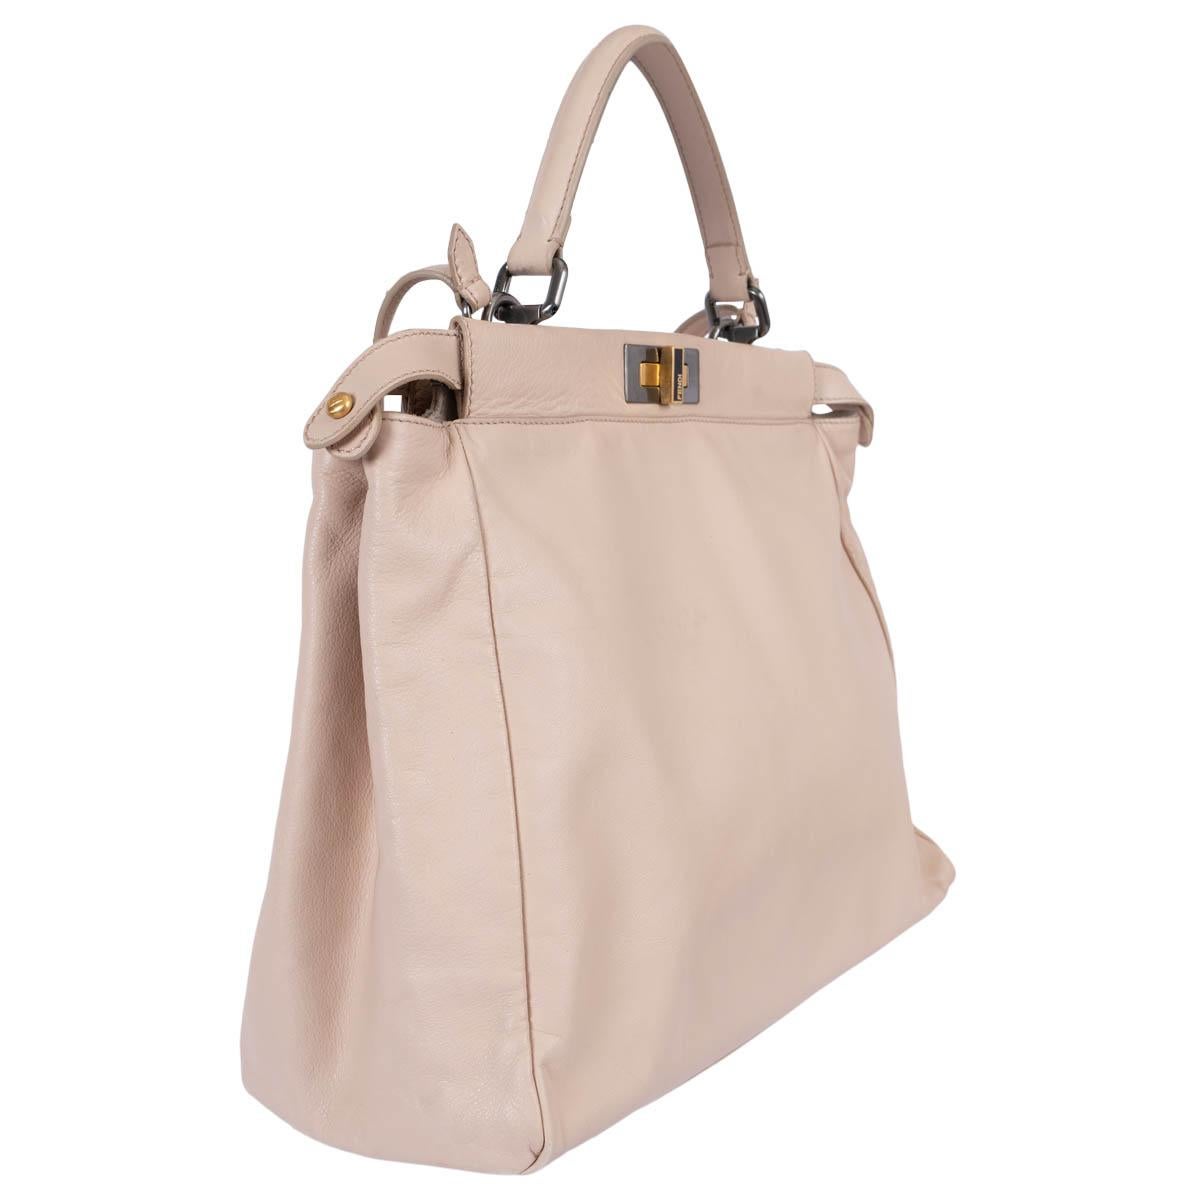 100% authentic Fendi Peekaboo Large shoulder bag in nude leather. Featuring gold-tone and ruthenuim hardware. Opens with turn-lock to a dual-compartment interior with one zipper pocket in the middle. Lined in off-white suede. Comes with a detachable